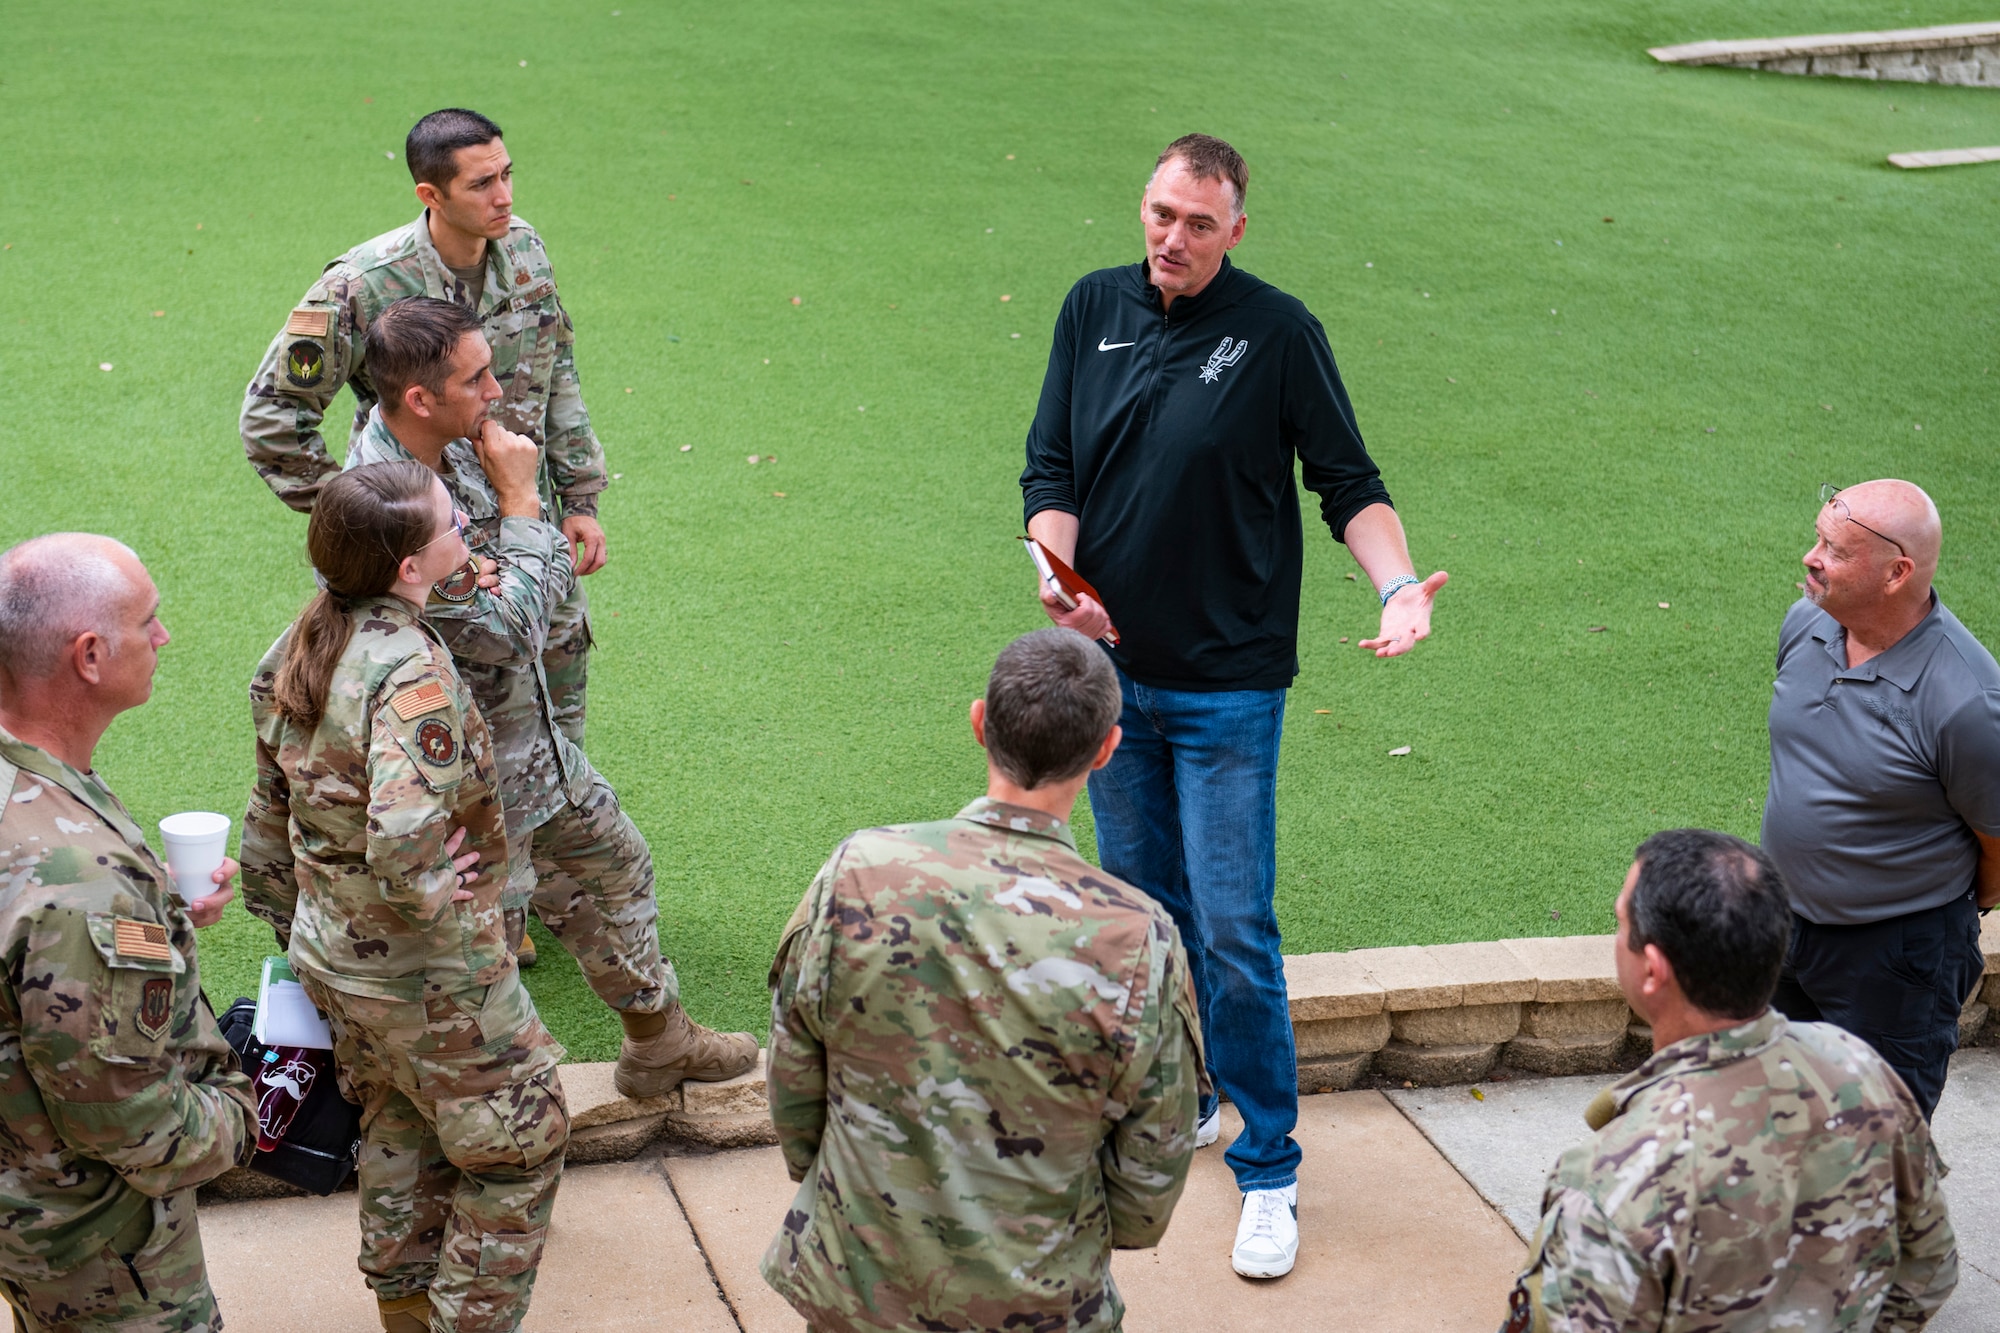 Phil Cullen, San Antonio Spurs director of basketball strategy, talks with members of the Special Warfare Training Wing during a quick tour of some of SWTW facilities at Joint Base San Antonio-Lackland, Texas, Aug. 15, 2022. The SWTW and Spurs met to discuss ideas and talk strategy on human performance. (U.S. Air Force photo by Brian J. Valencia)